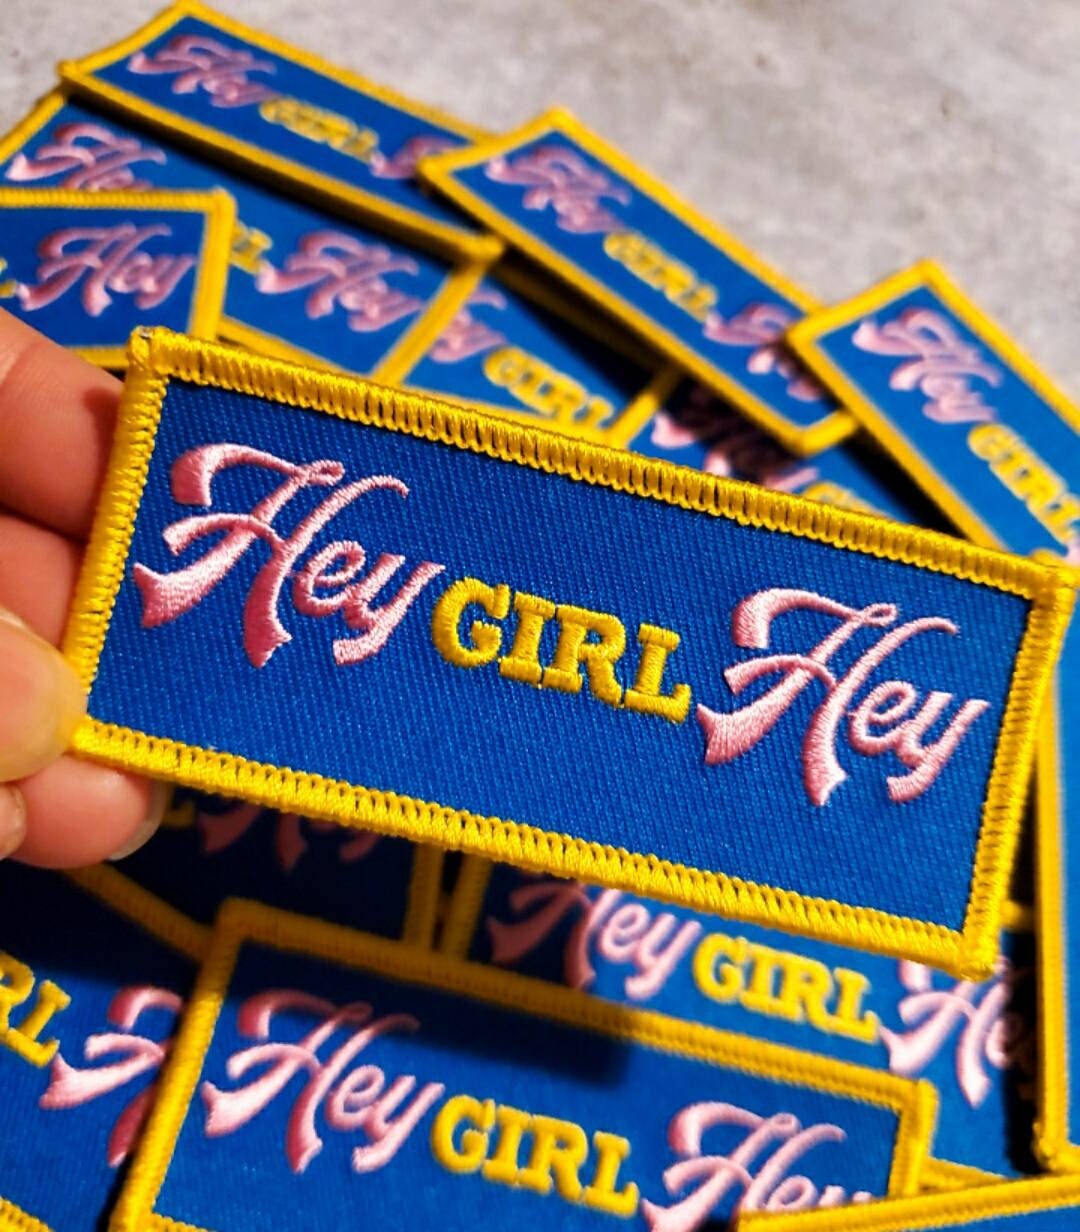 New "Hey Girl Hey," (YELLOW Border) Adorable BFF Badge,Small Patch, Feminist AF, Iron-on Applique, Size 3"x1", Bridal Party